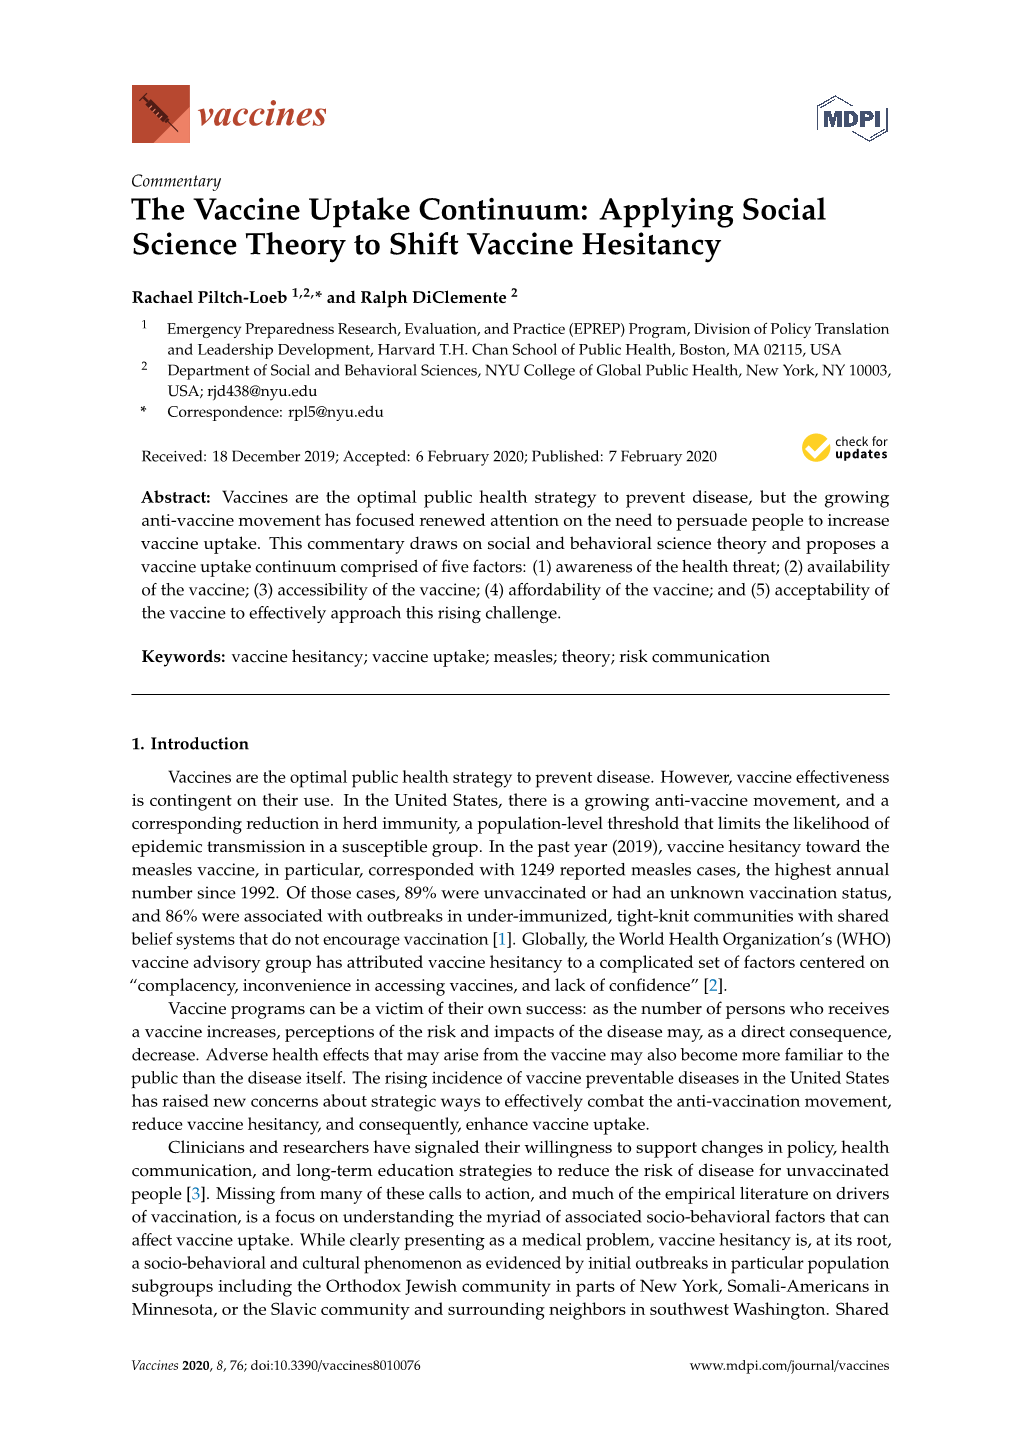 The Vaccine Uptake Continuum: Applying Social Science Theory to Shift Vaccine Hesitancy